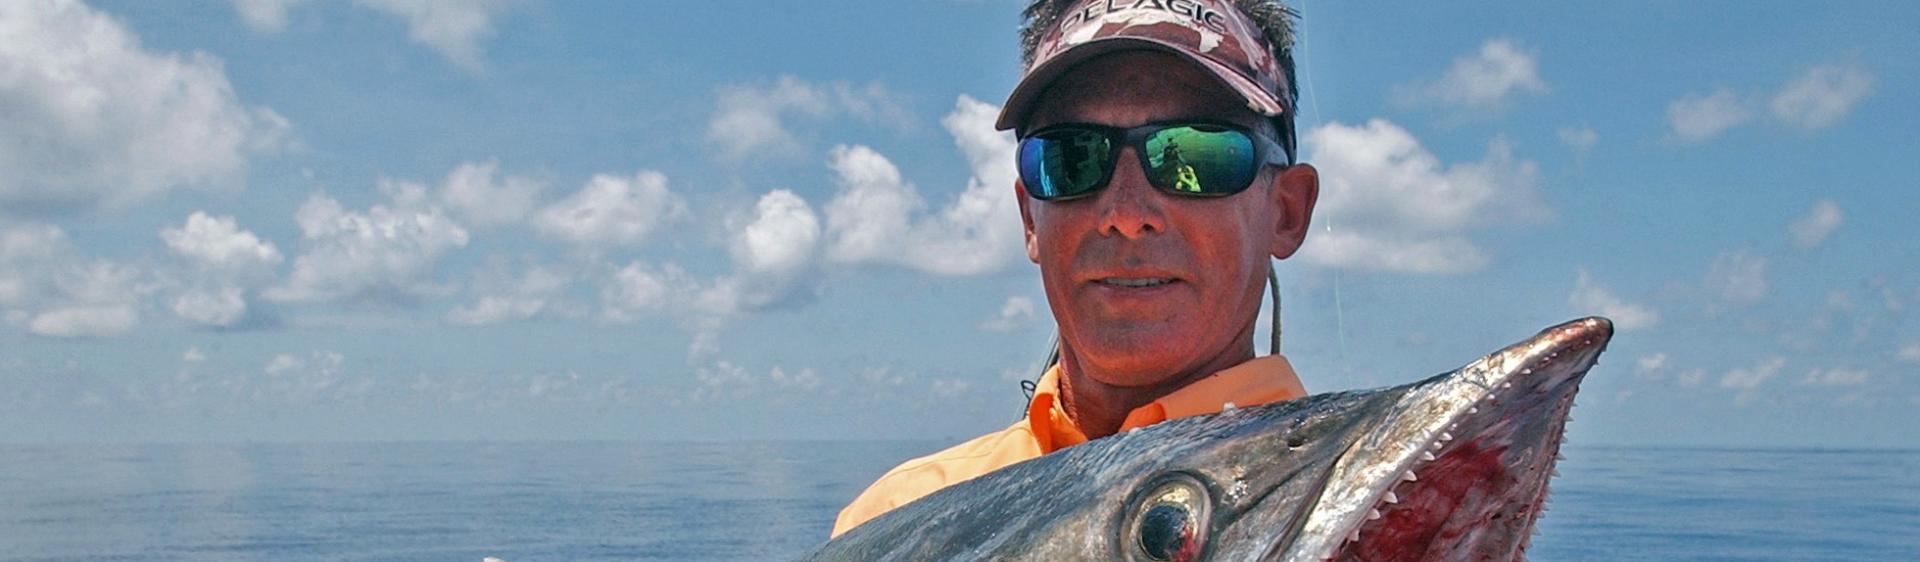 Go Wild With David Sykes: Offshore Fishing in Corpus Christi